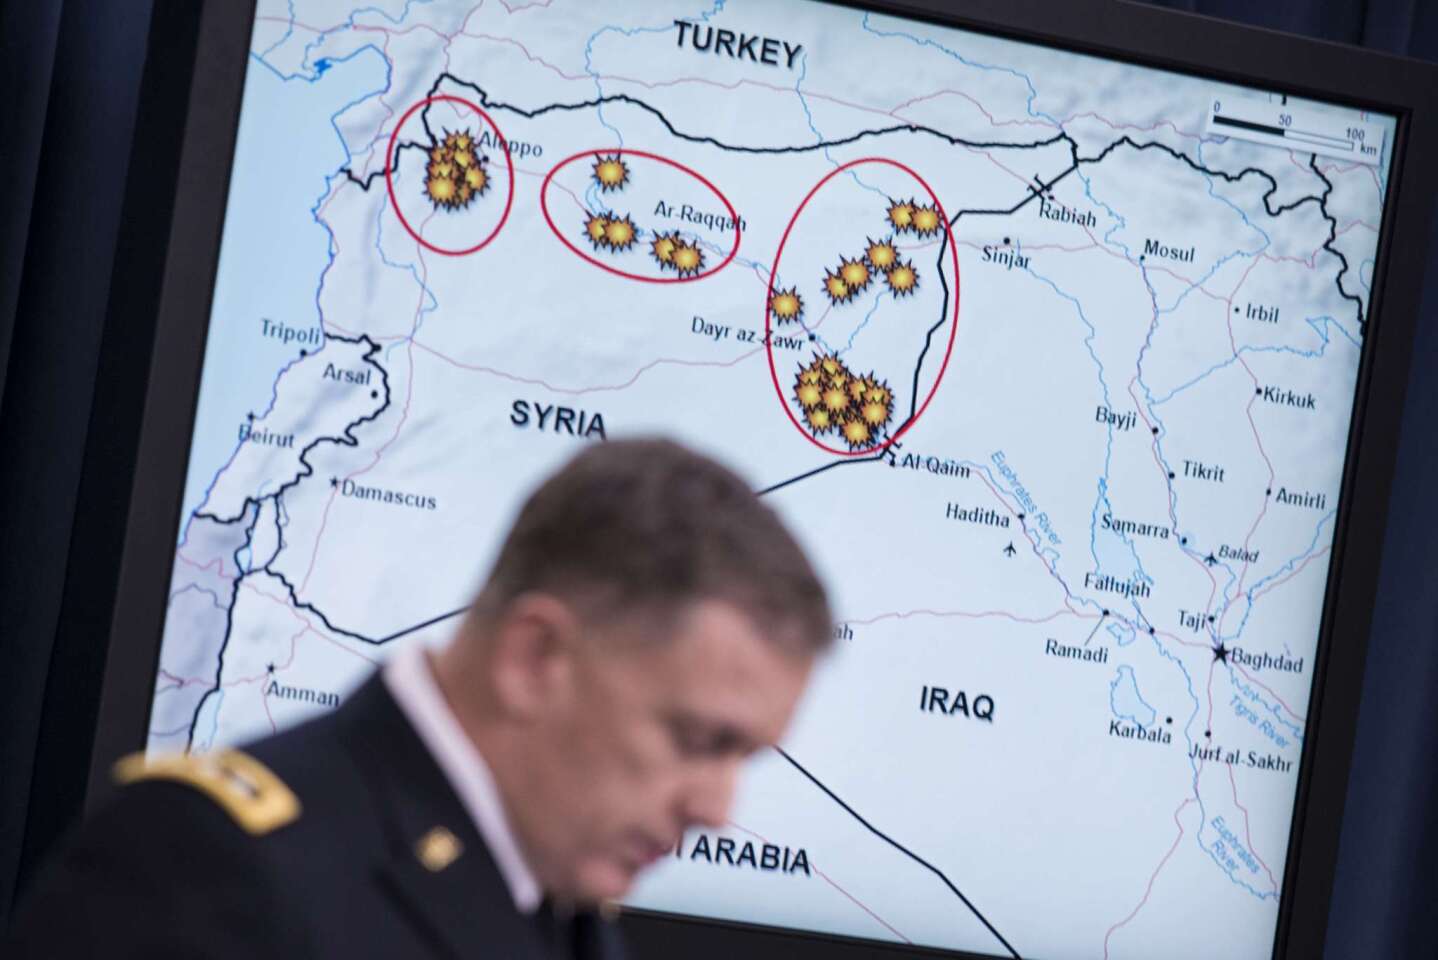 Lt. Gen. William C. Mayville Jr., director of operations for the Joint Chiefs of Staff, speaks about airstrikes in Syria during a briefing at the Pentagon.